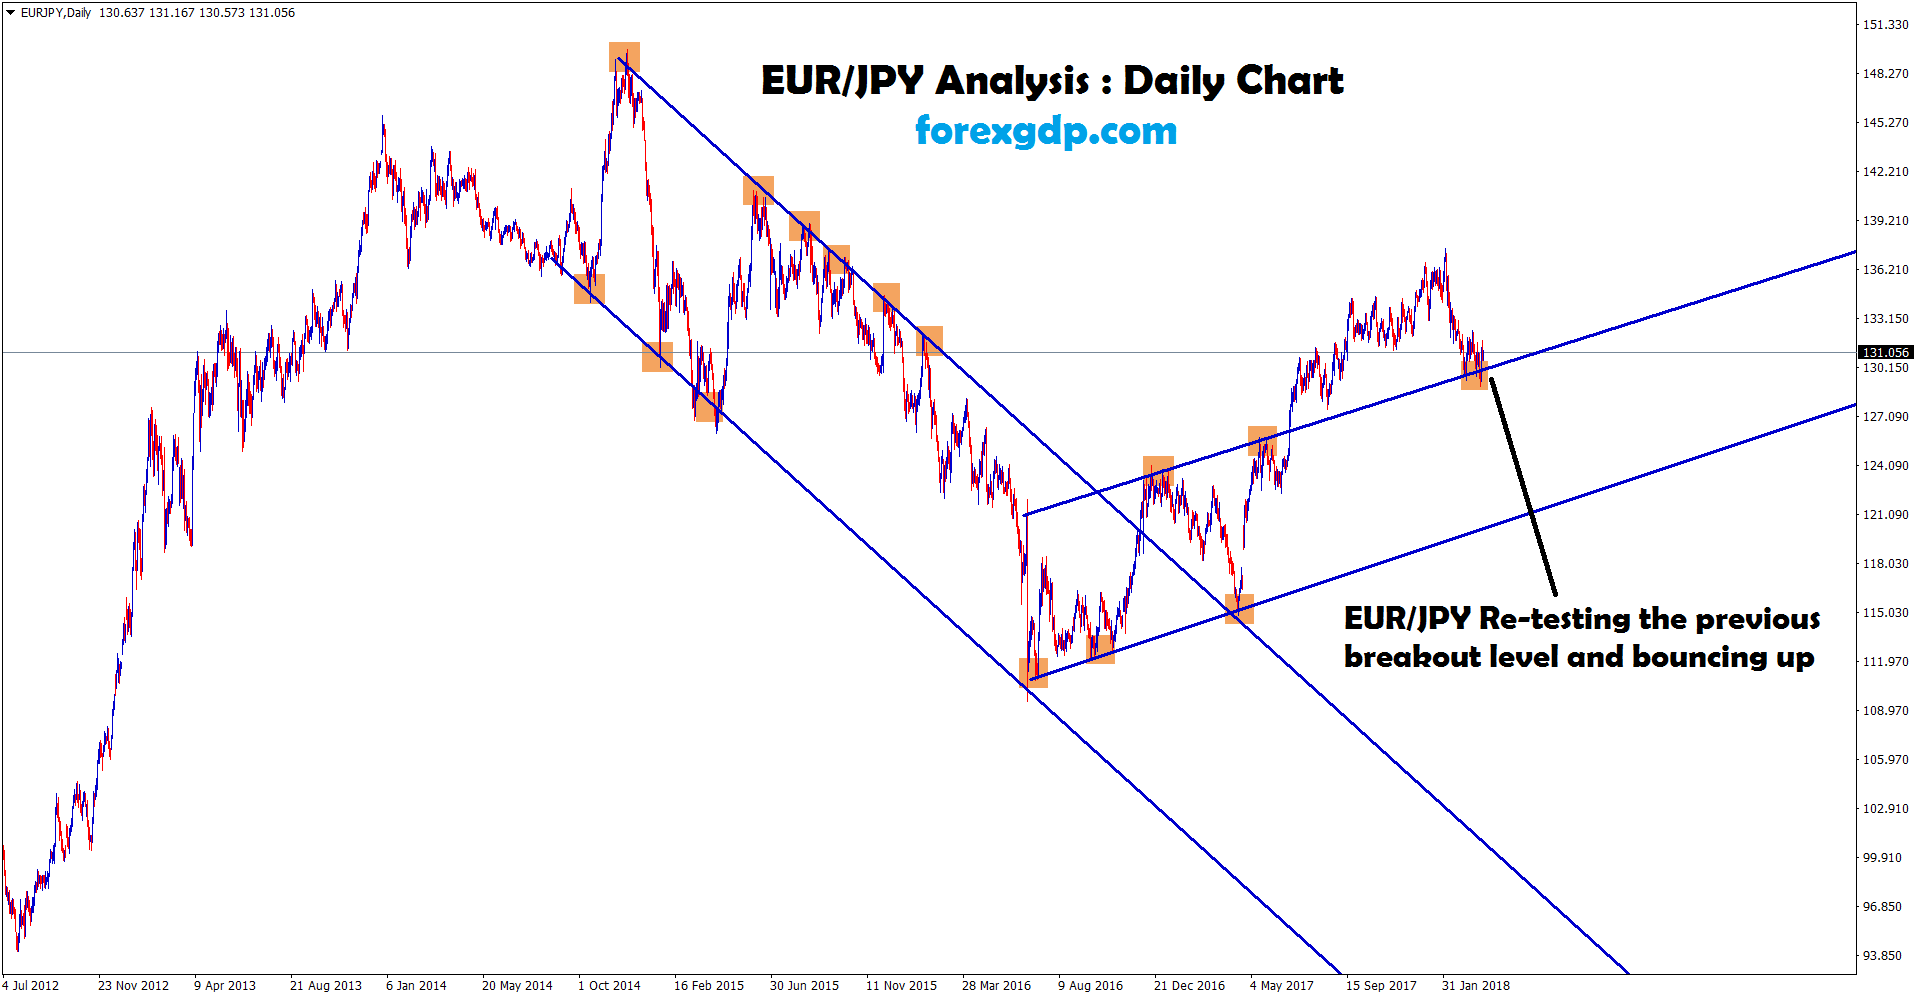 eurjpy re-testing the breakout level and bouncing up